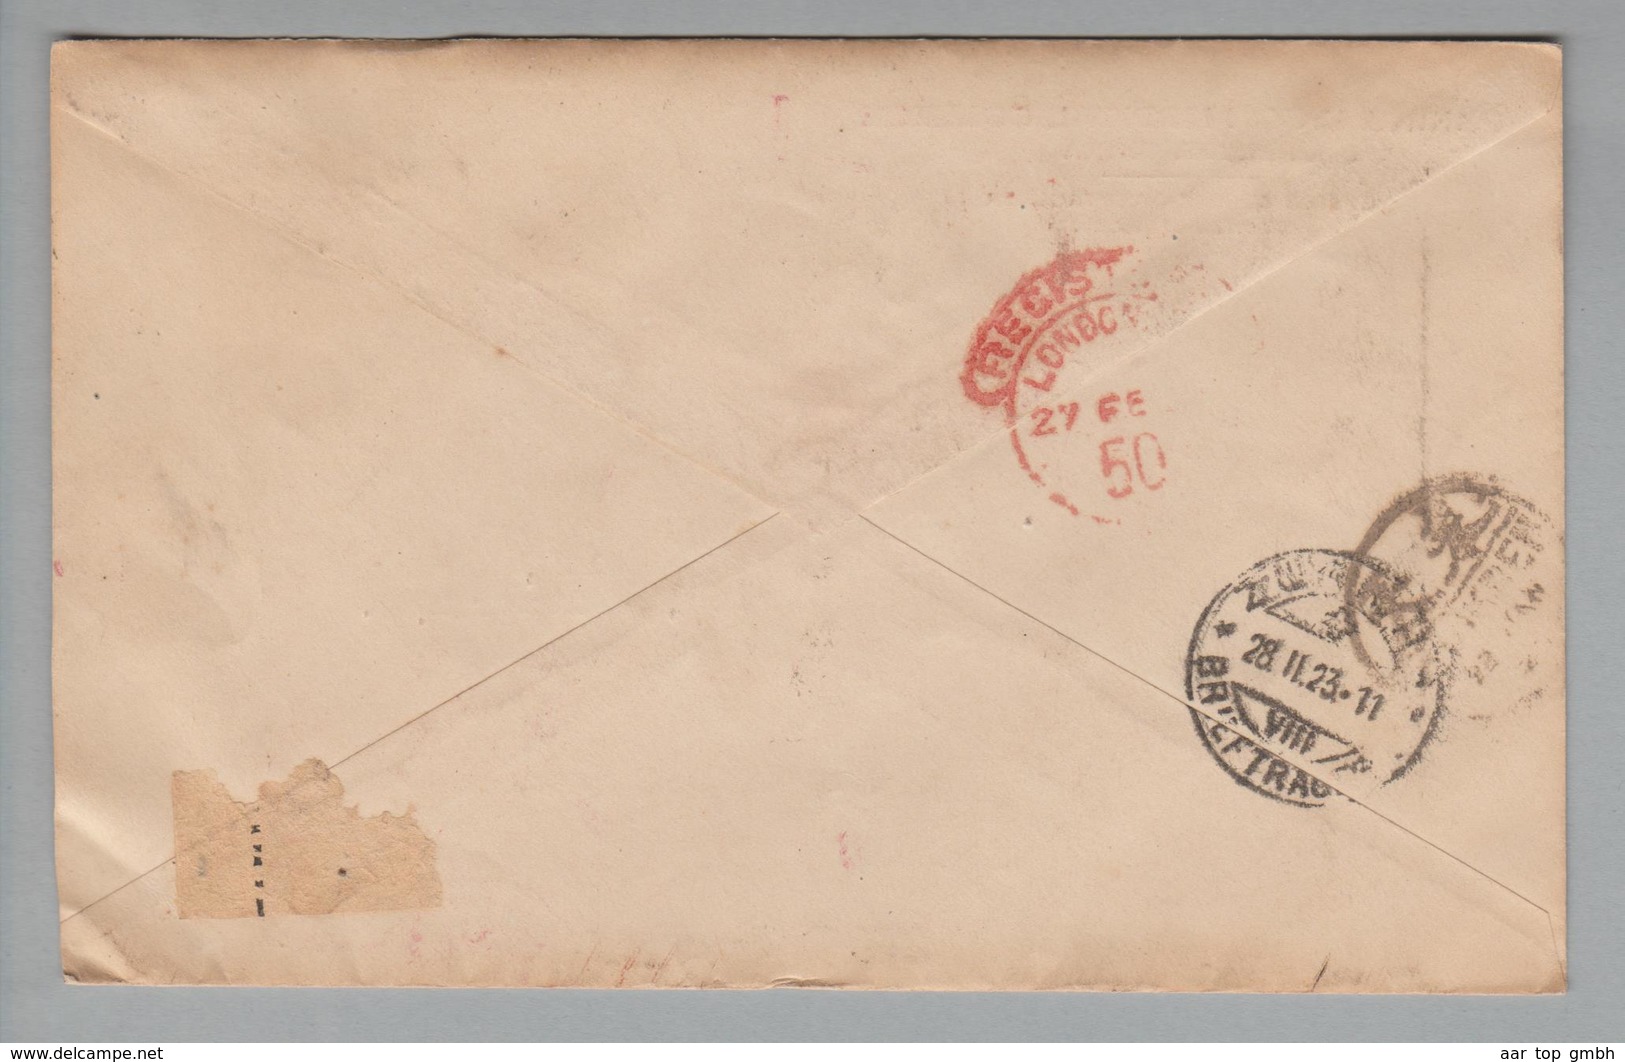 China 1923-02-?? Peking Registered Cover Mit Perfin "Peking Union Medical College" über London 20 Ct. EF N.Zürich - Sinkiang 1915-49